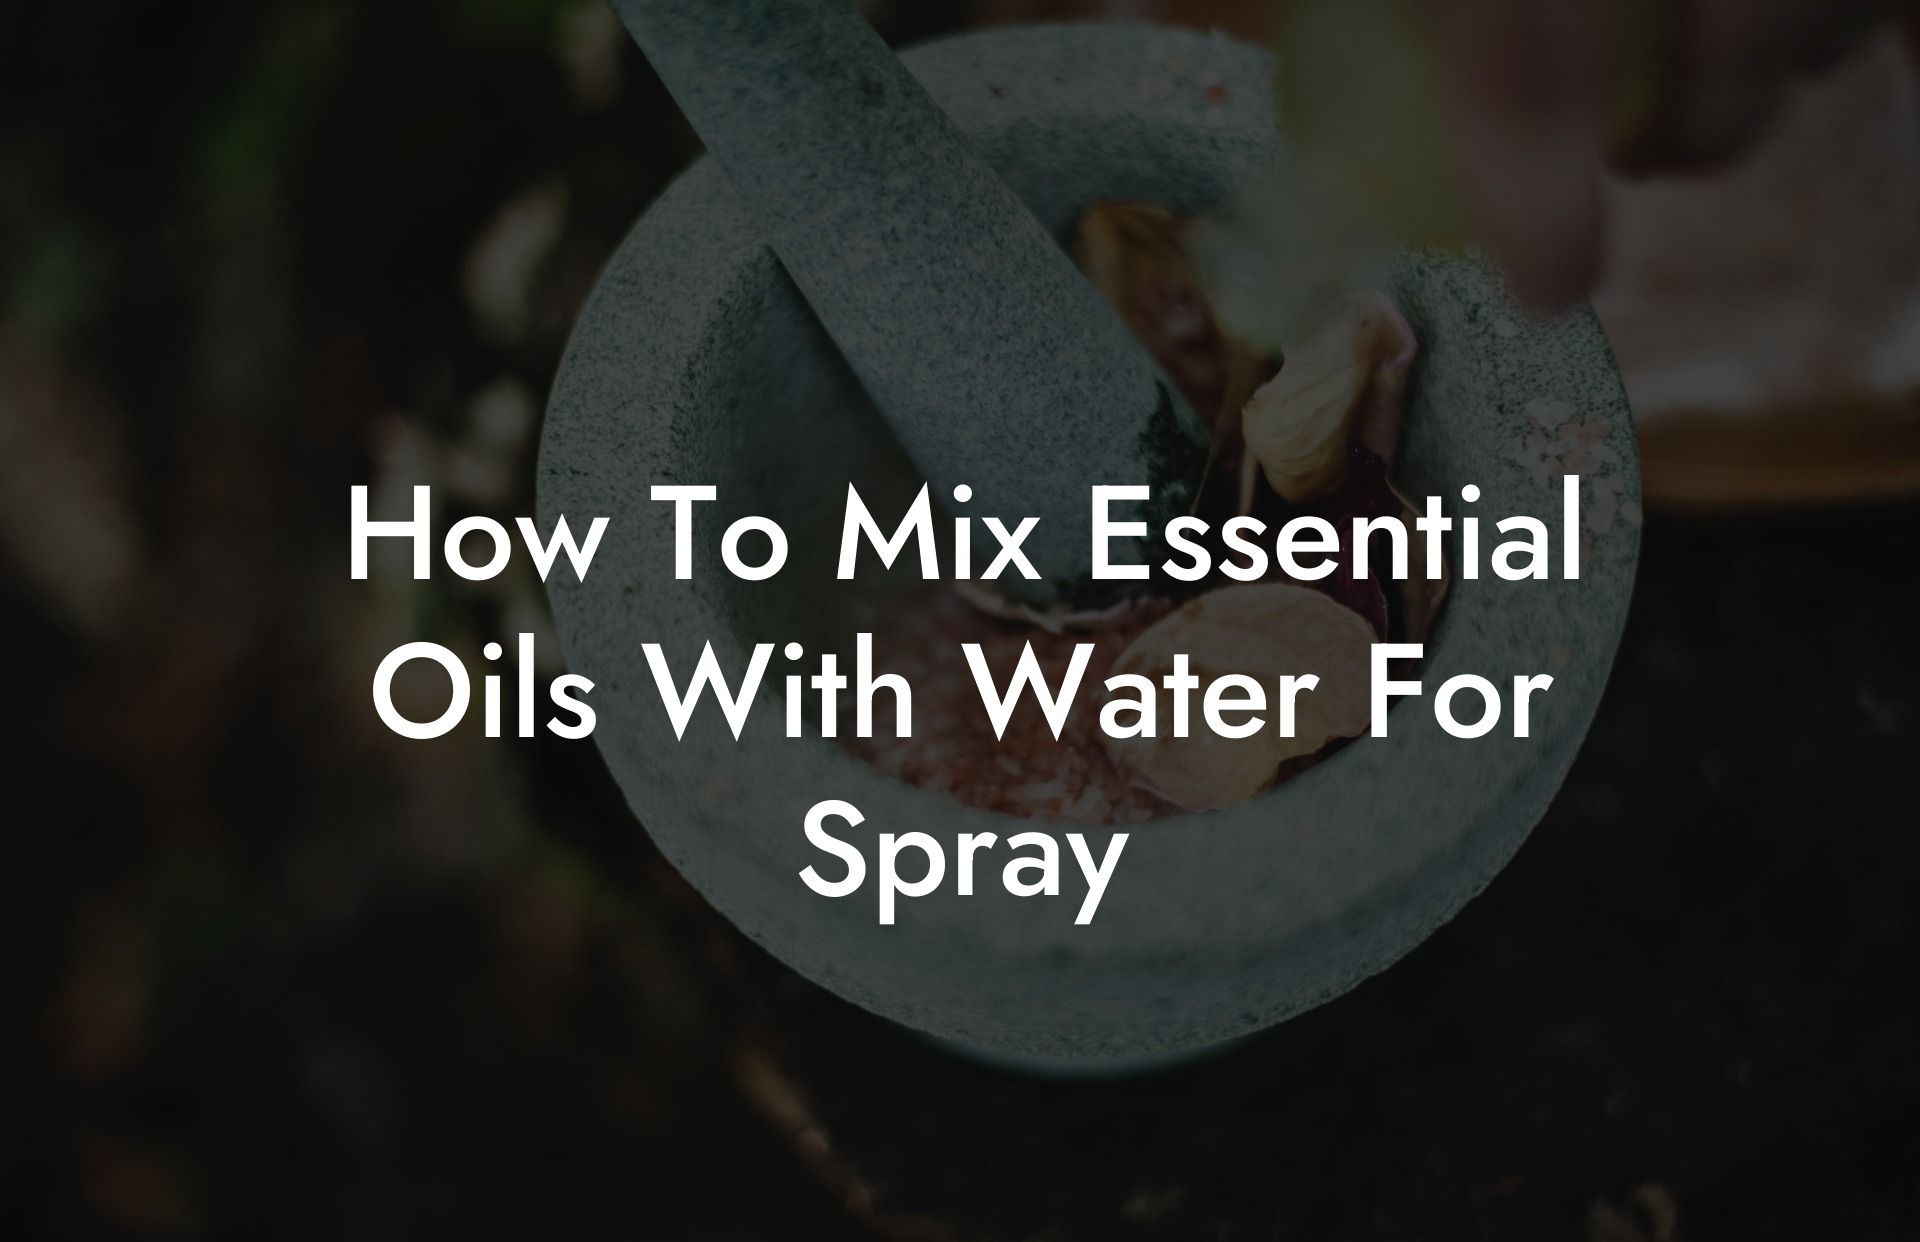 How To Mix Essential Oils With Water For Spray